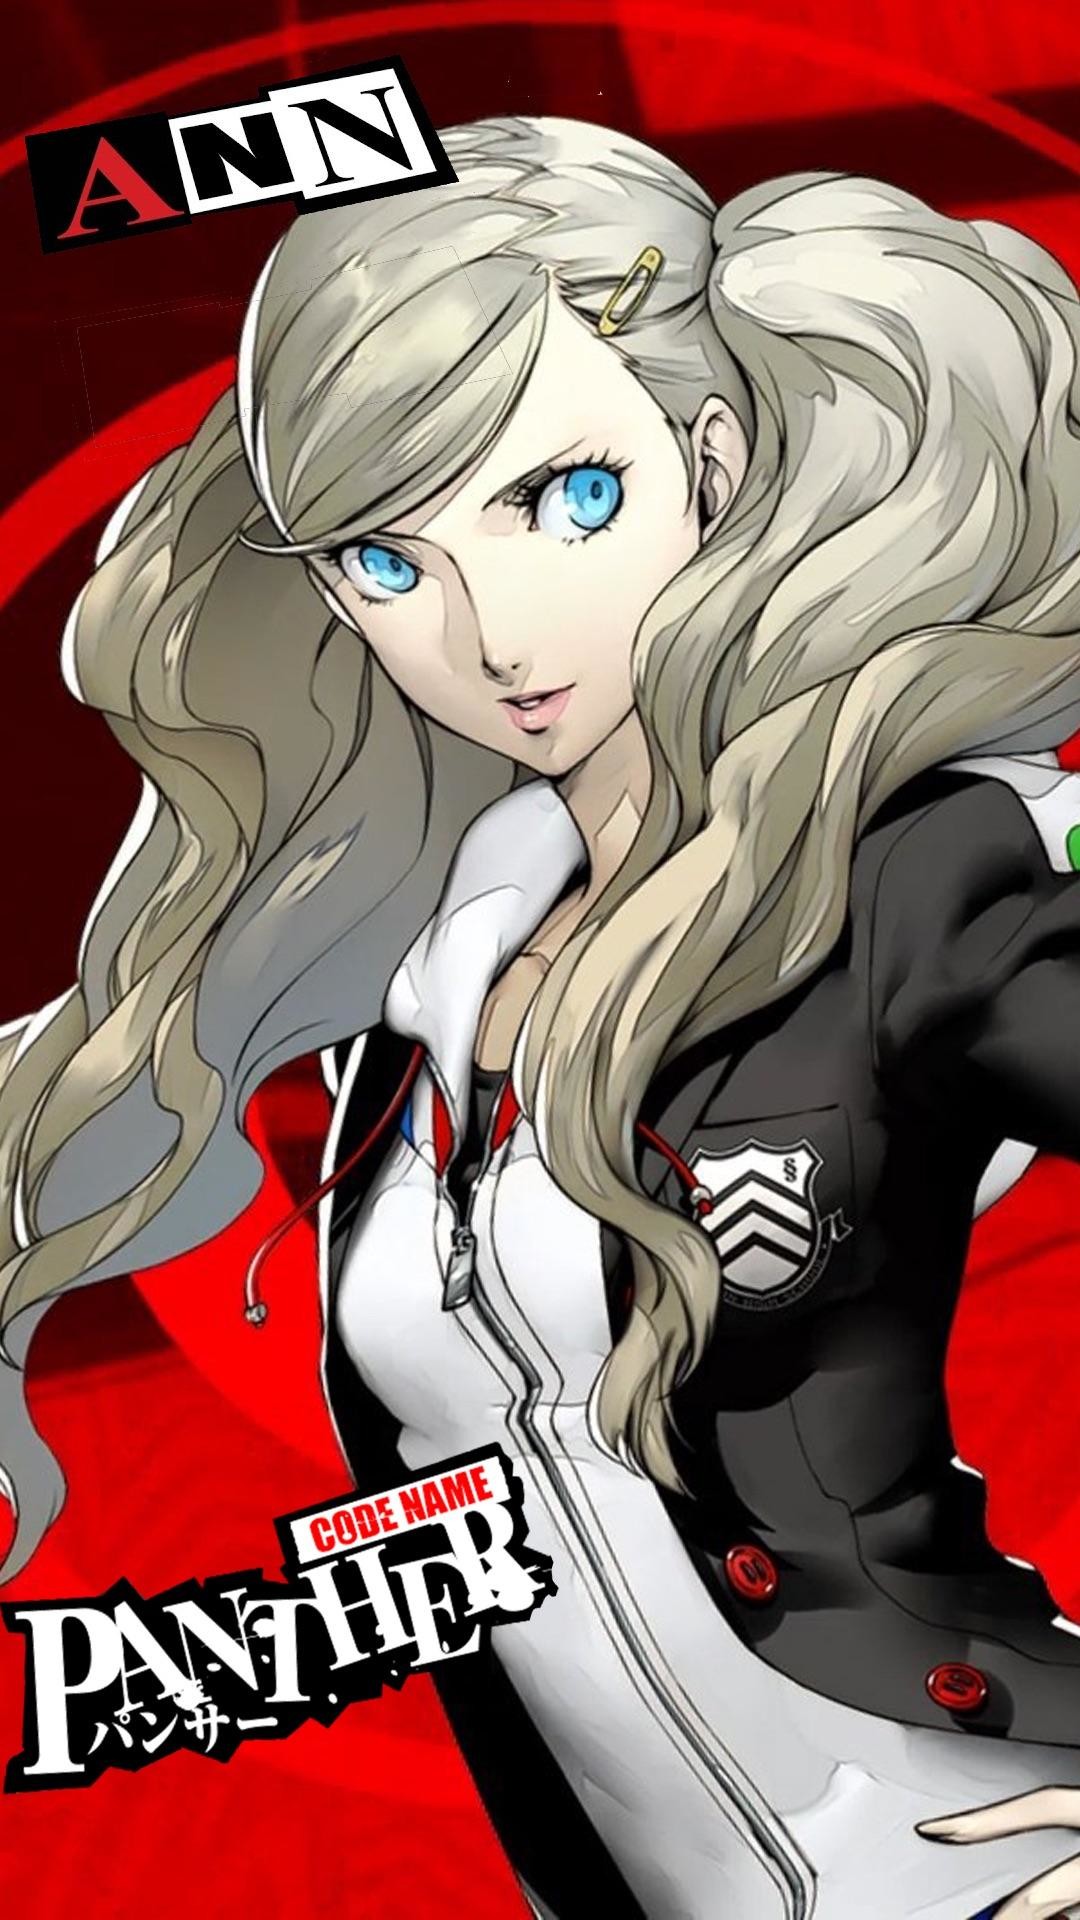 Ann wallpaper I made for iPhone 6 / 6S / 7 plus 1920×1080 Need